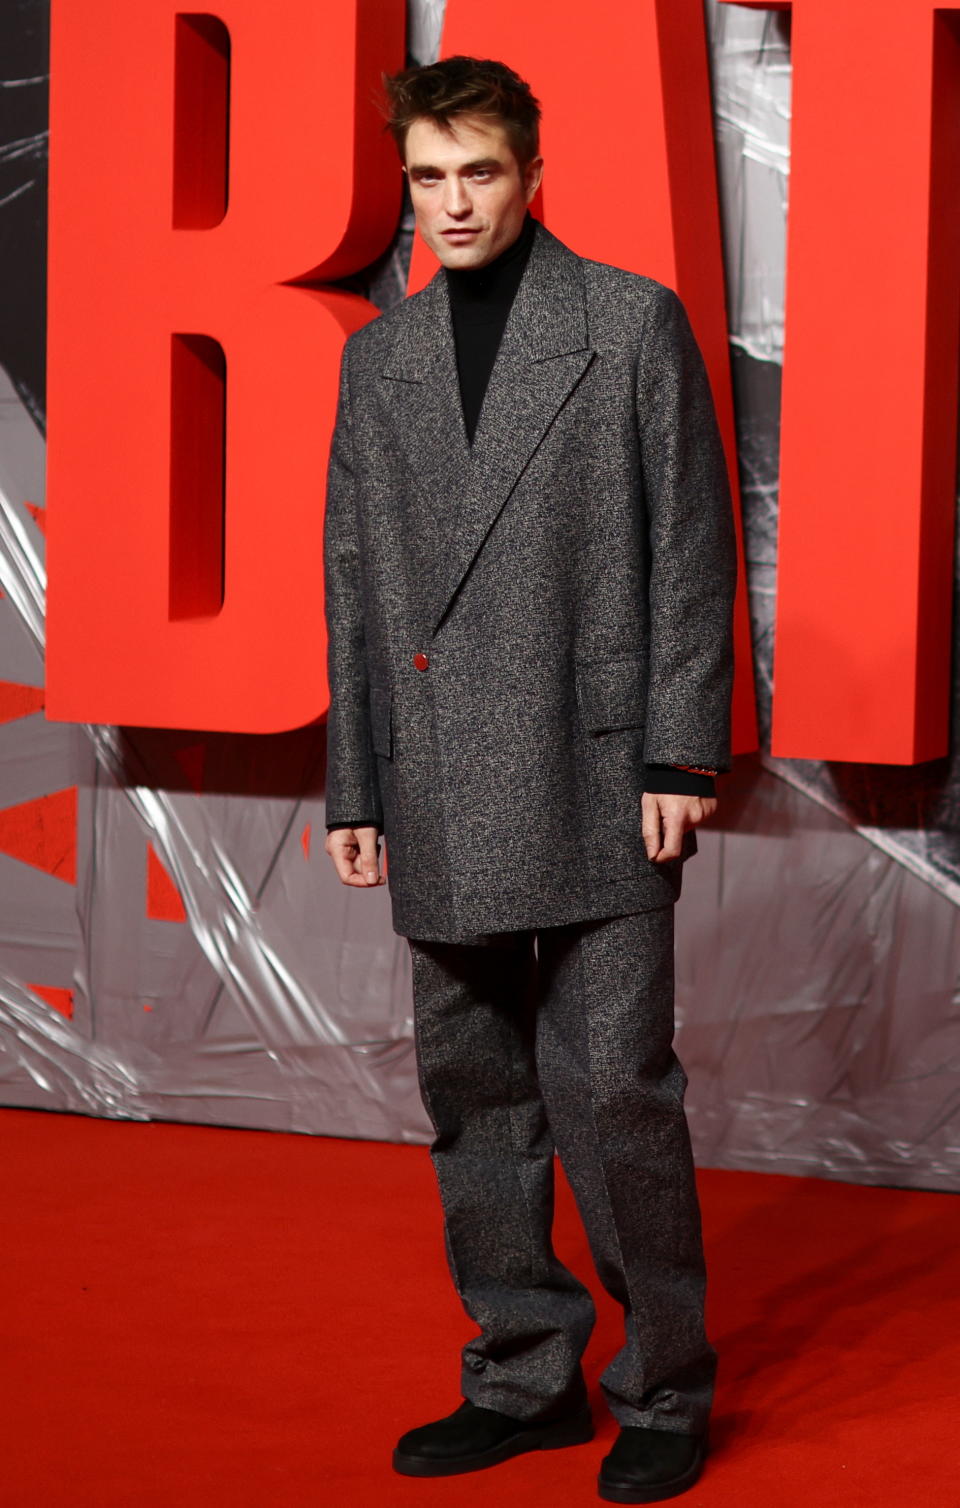 Robert Pattinson in a Jil Sander oversized suit.  (Image: Getty Images)